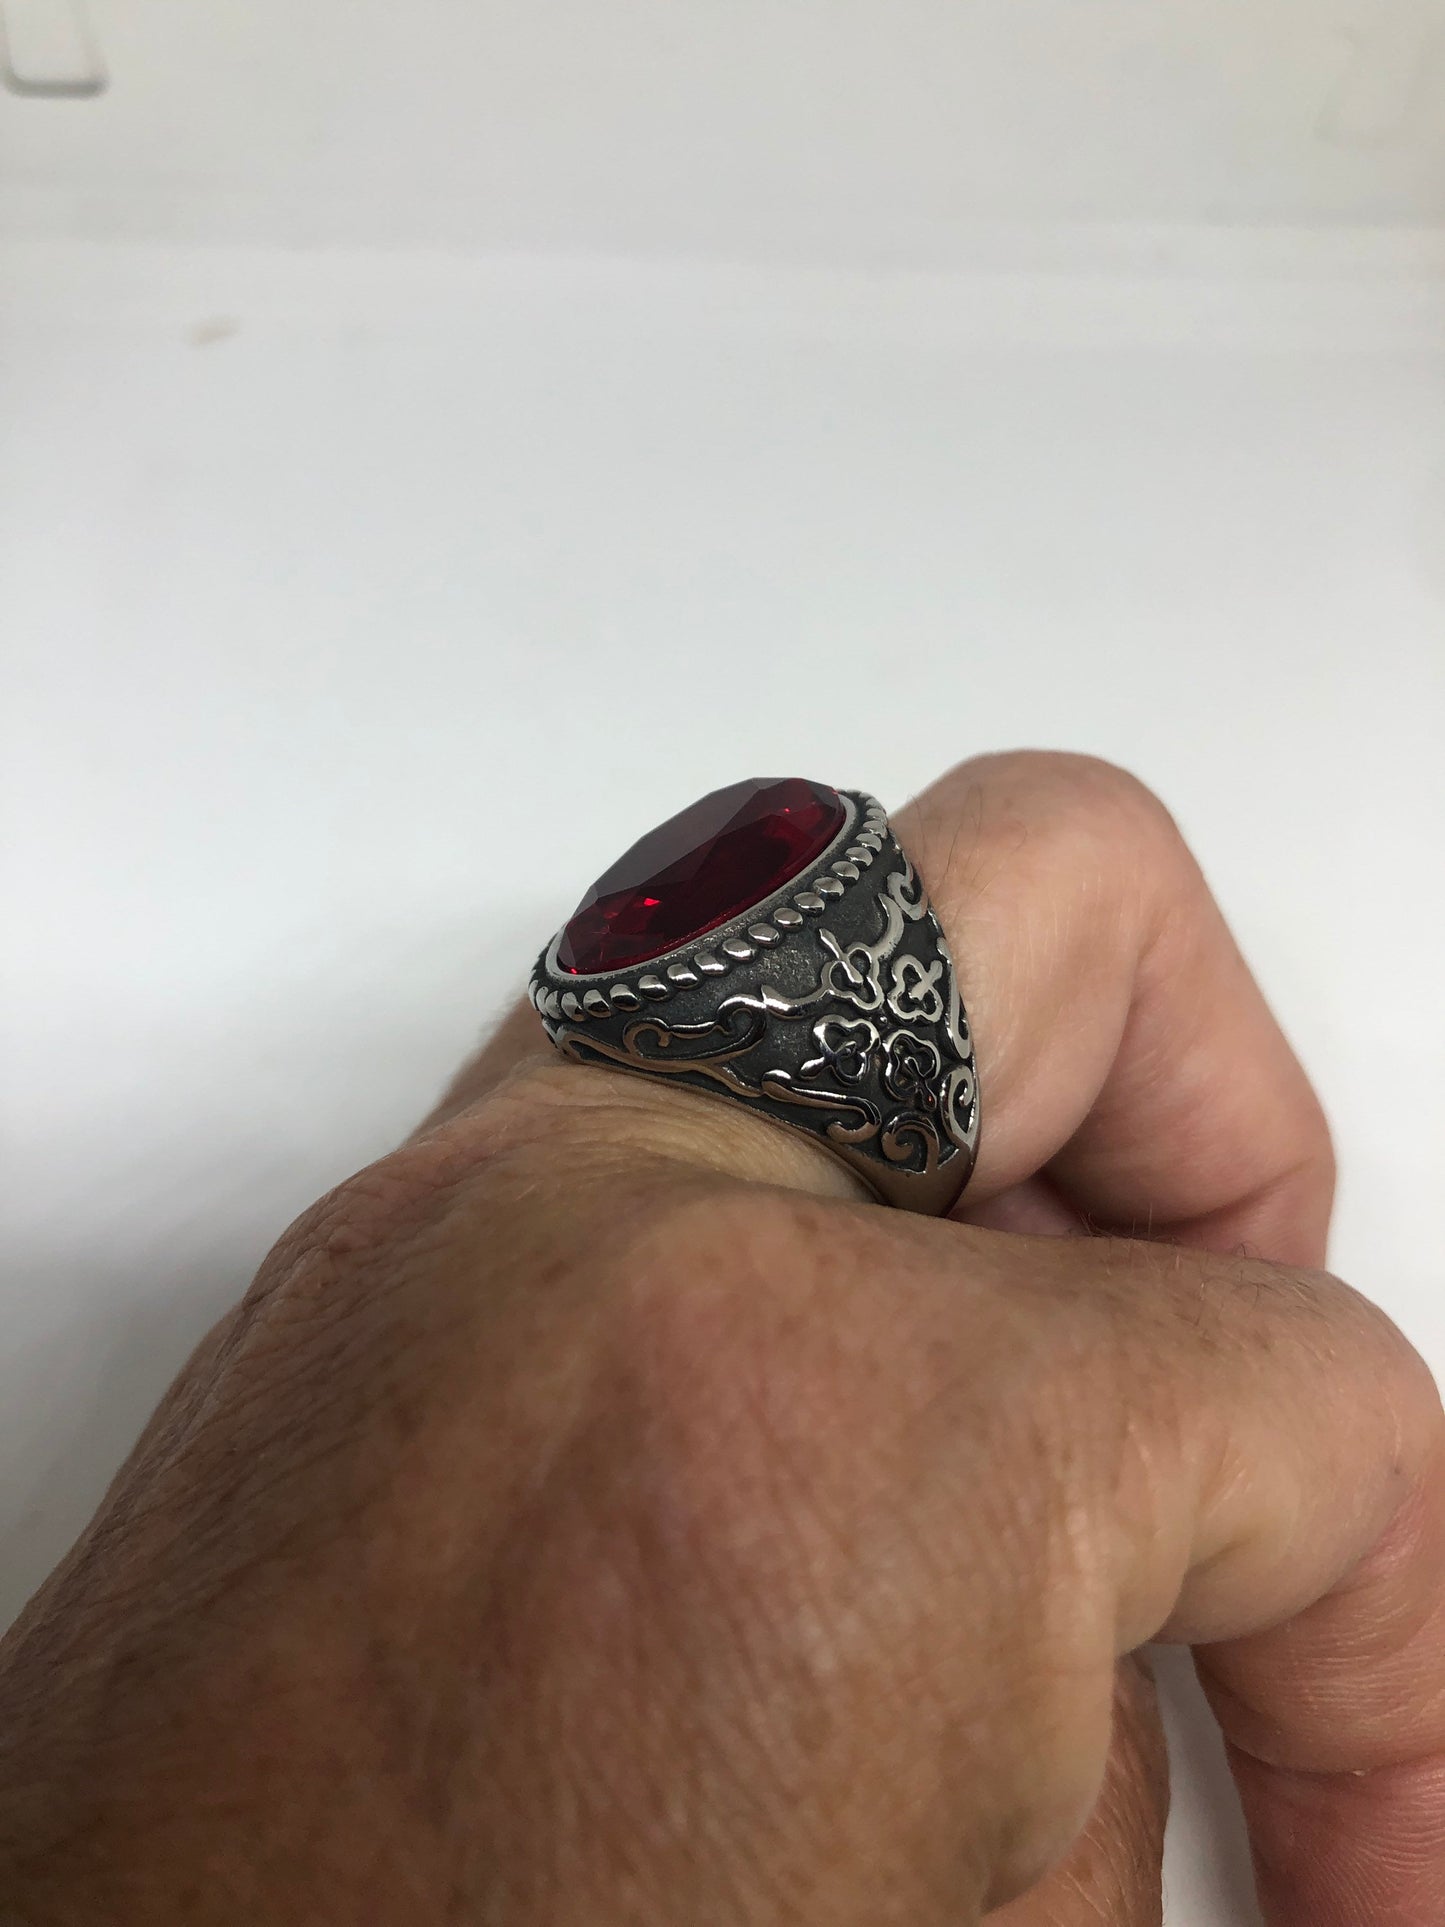 Vintage Red Ruby Glass Mens Ring Stainless Steel